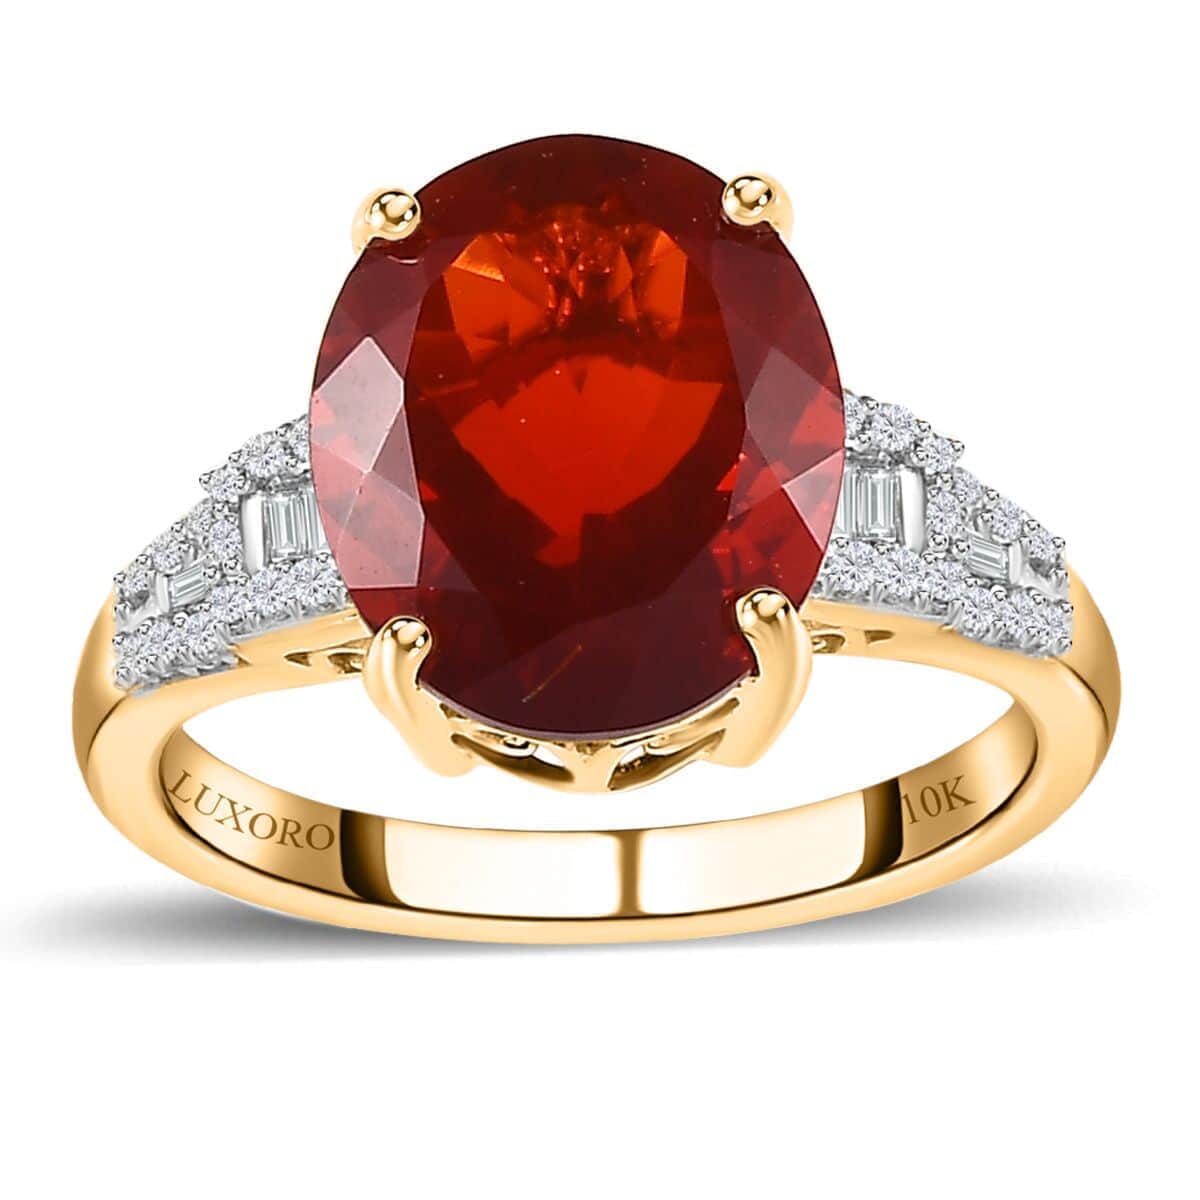 Luxoro 10K Yellow Gold Premium Mexican Cherry Fire Opal, Diamond (0.25 cts) Ring (Size 10.0) 4.25 ctw image number 0